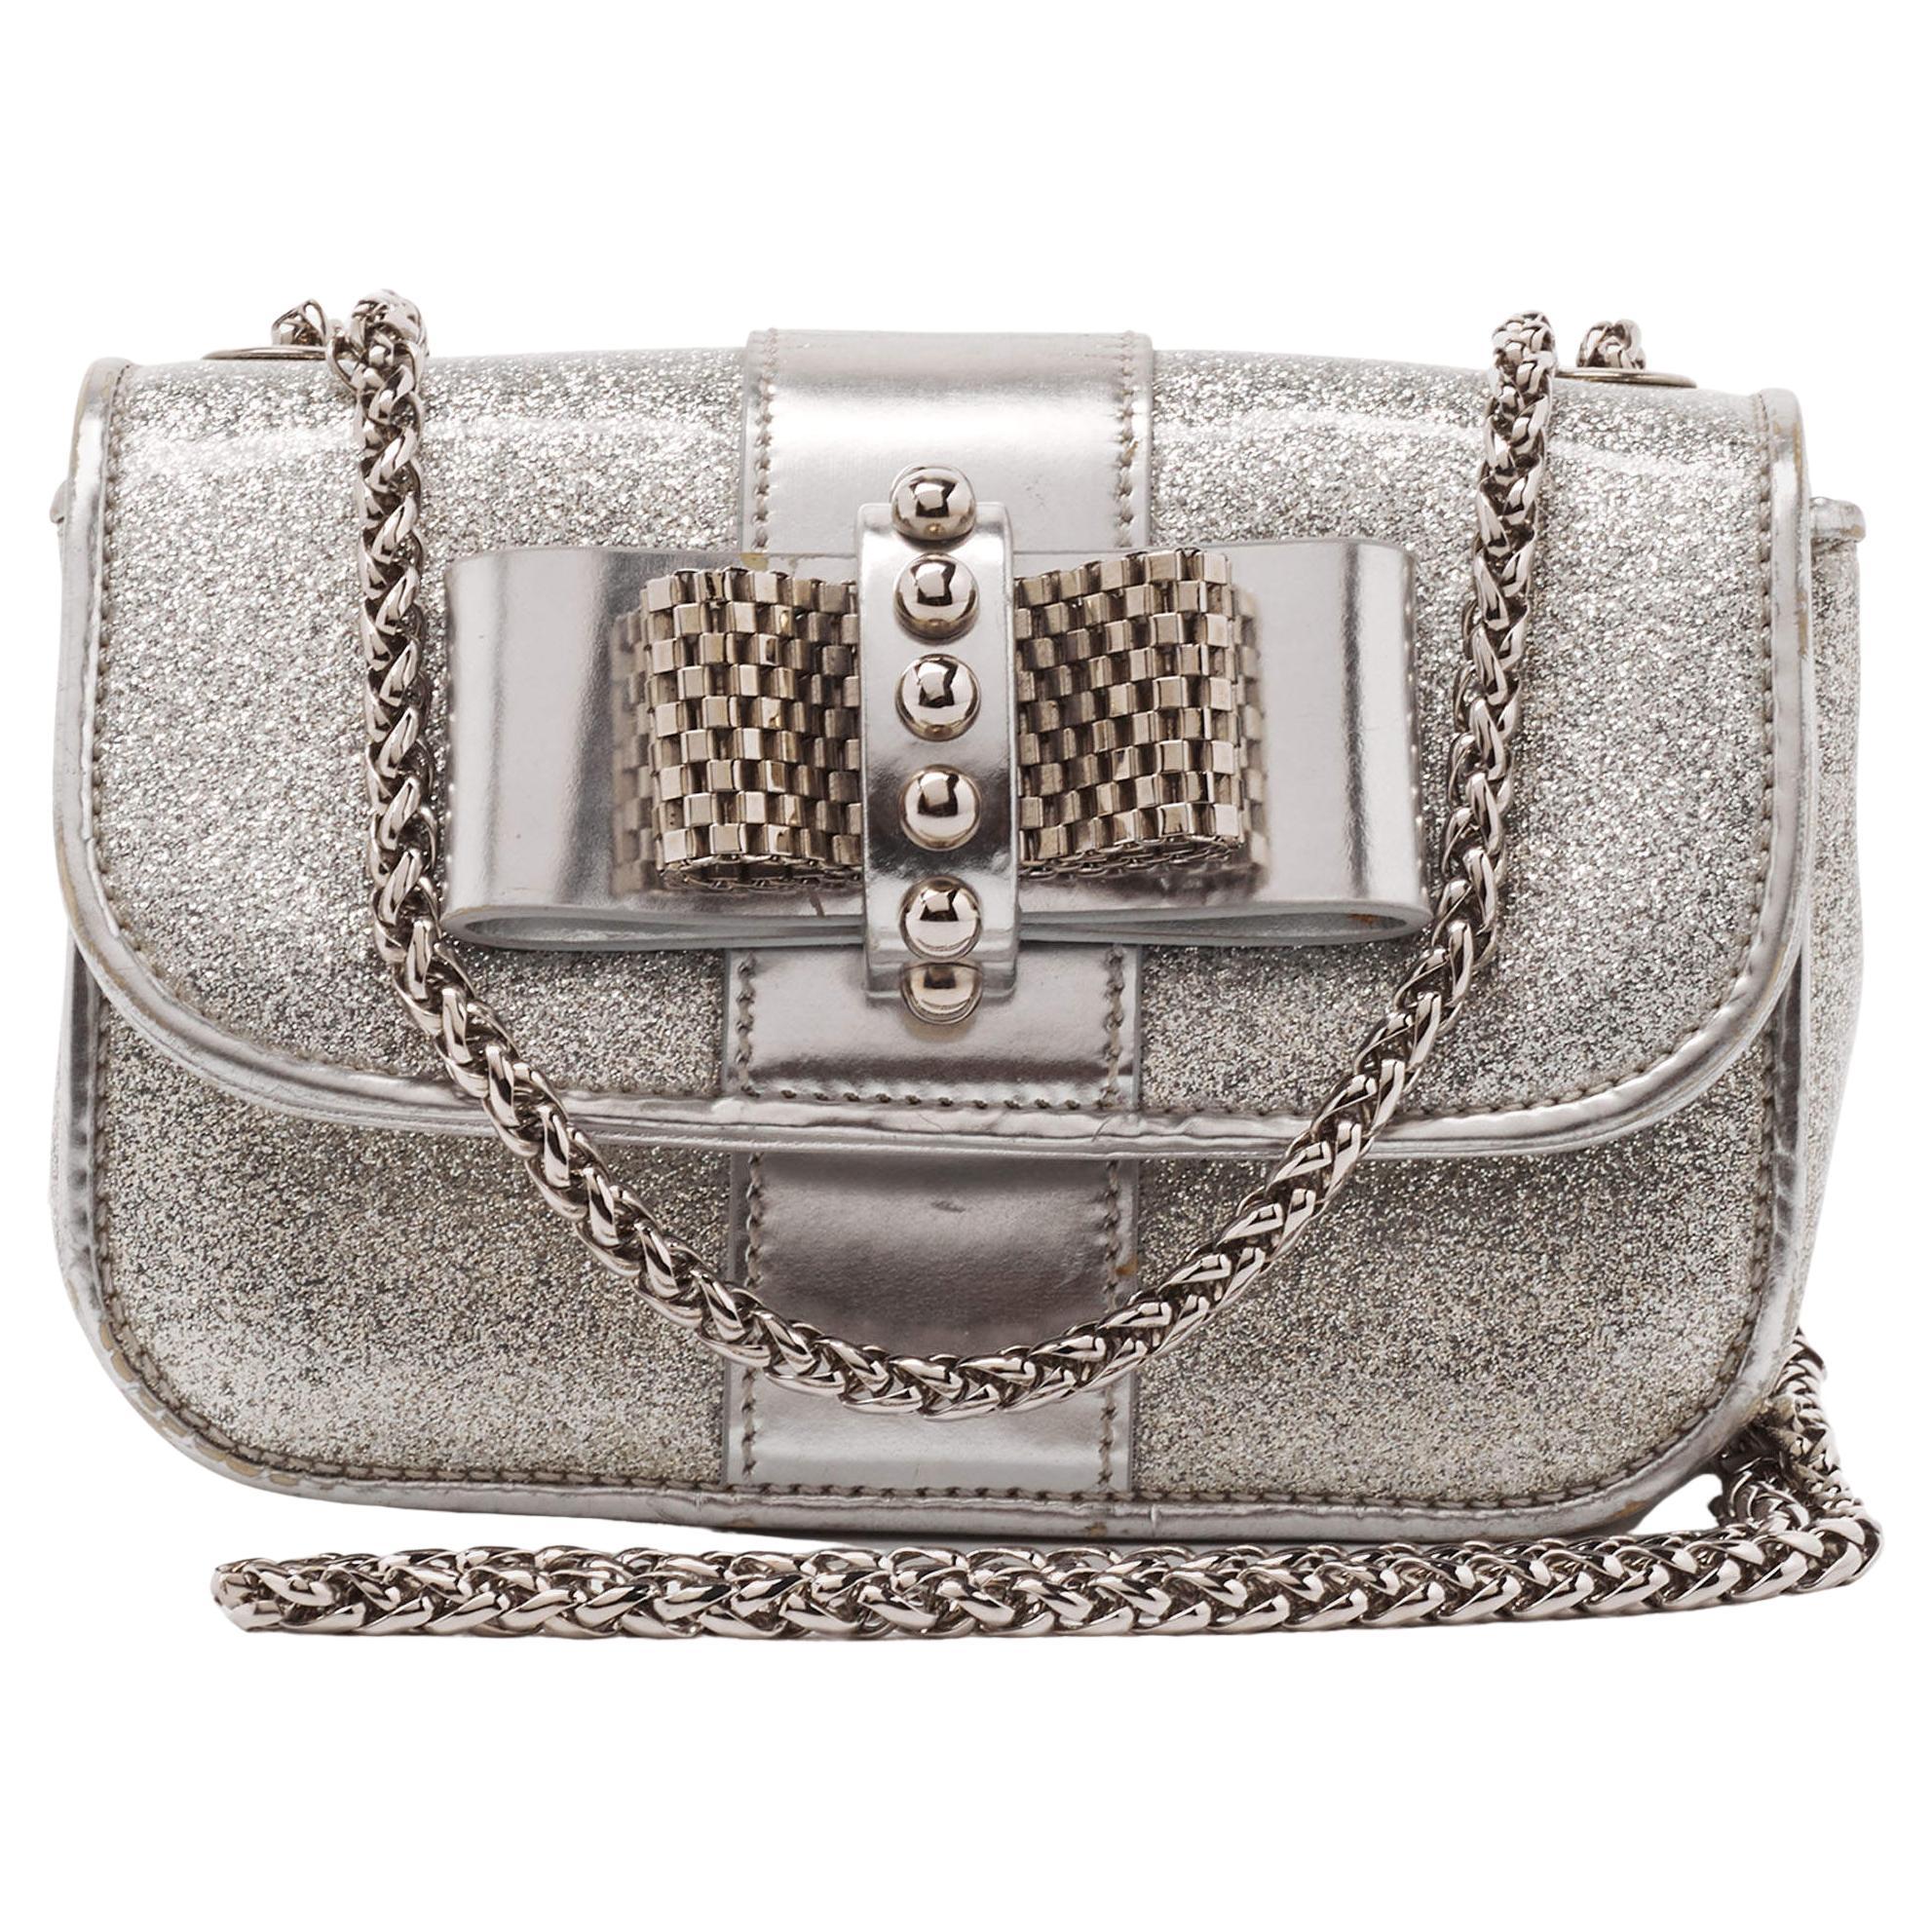 Christian Louboutin Silver Patent Leather Mini Spiked Sweet Charity Crossbody